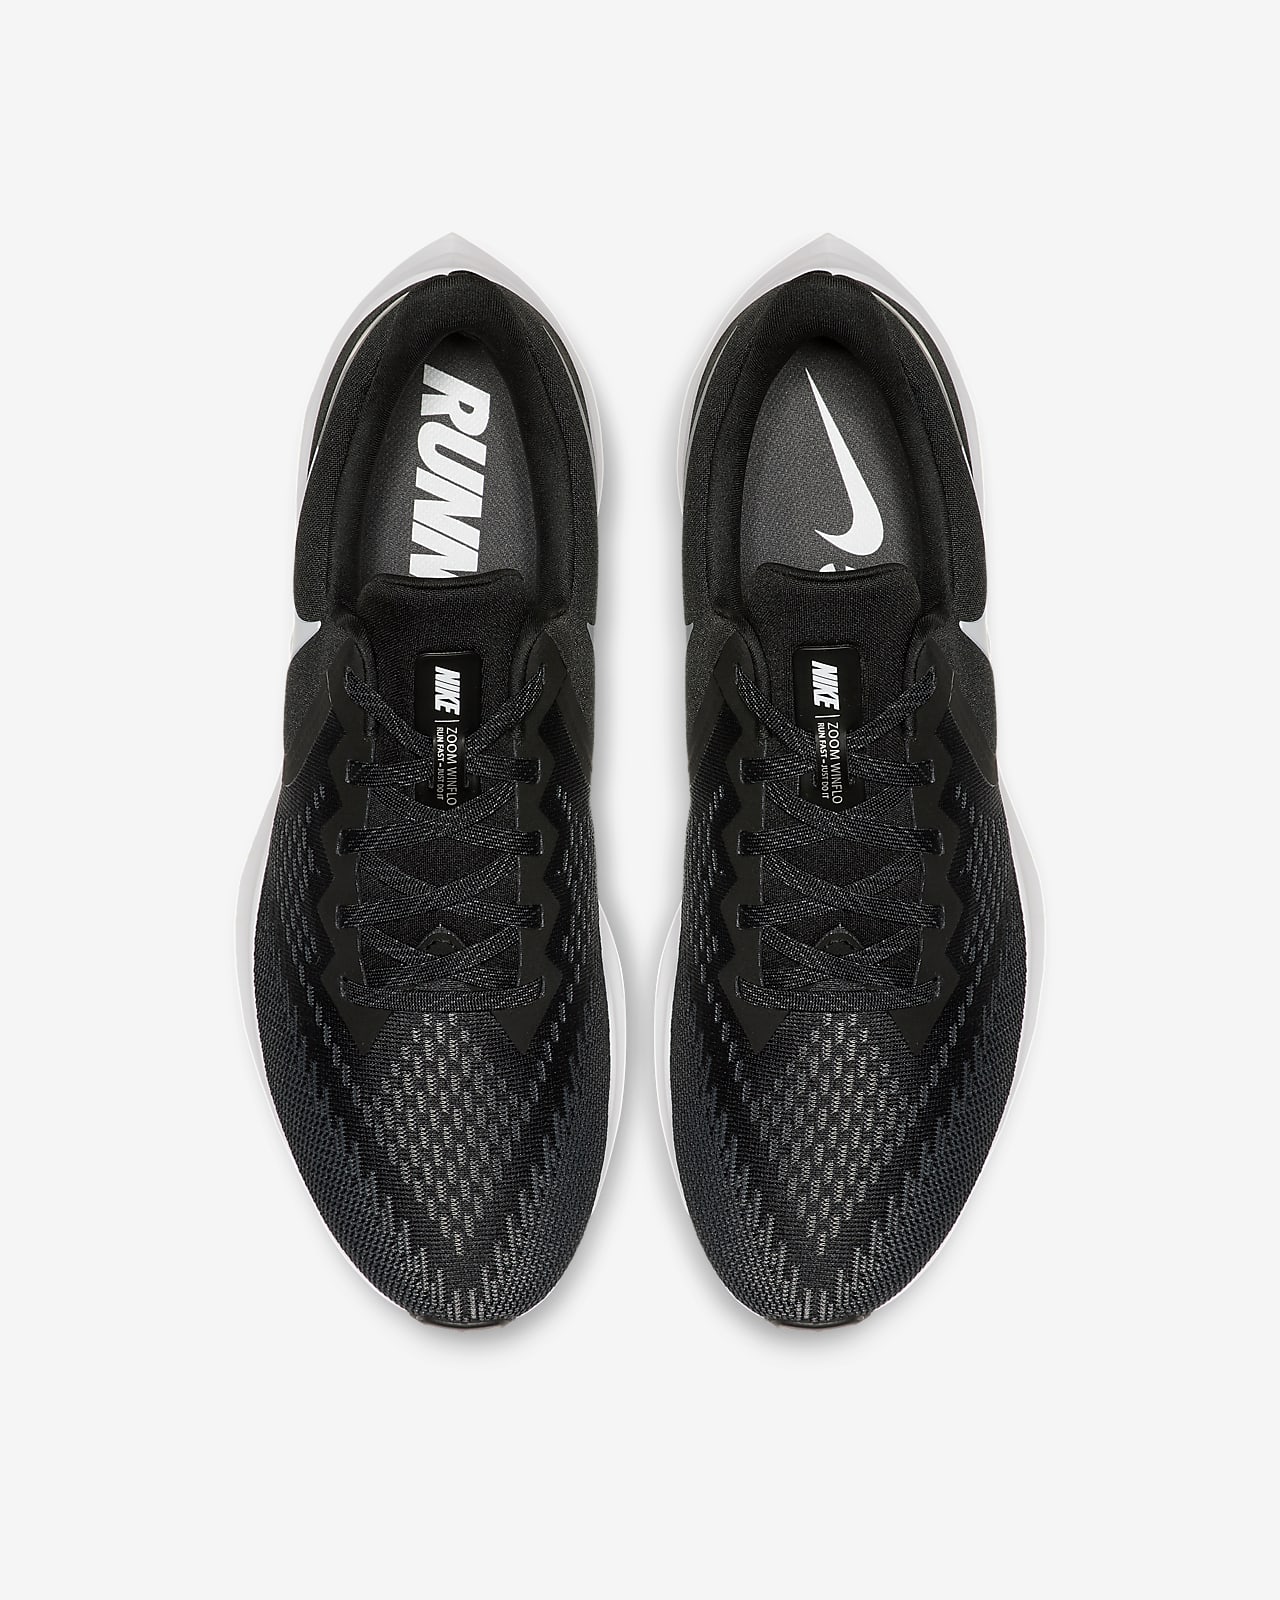 nike men's air zoom winflo 6 shield running shoes review